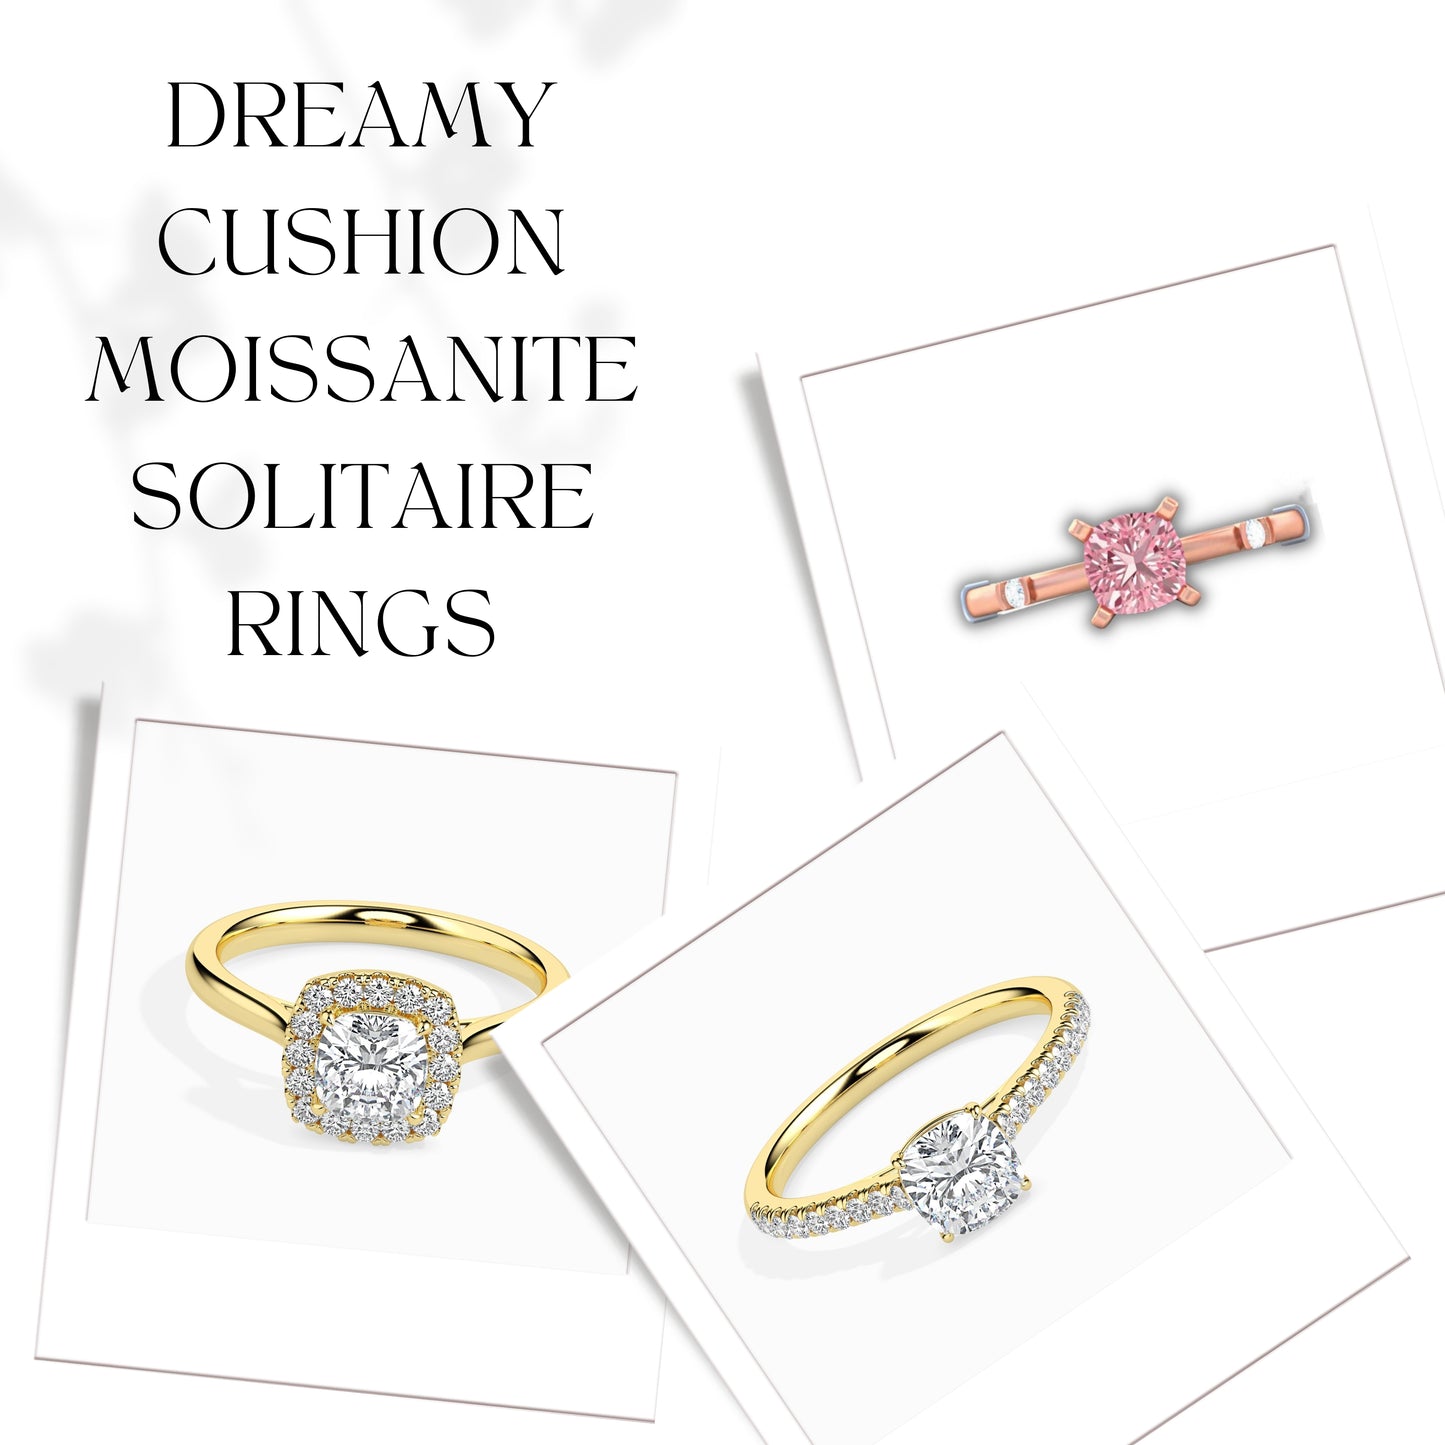 Dreamy Cushion Moissanite Solitaire Rings